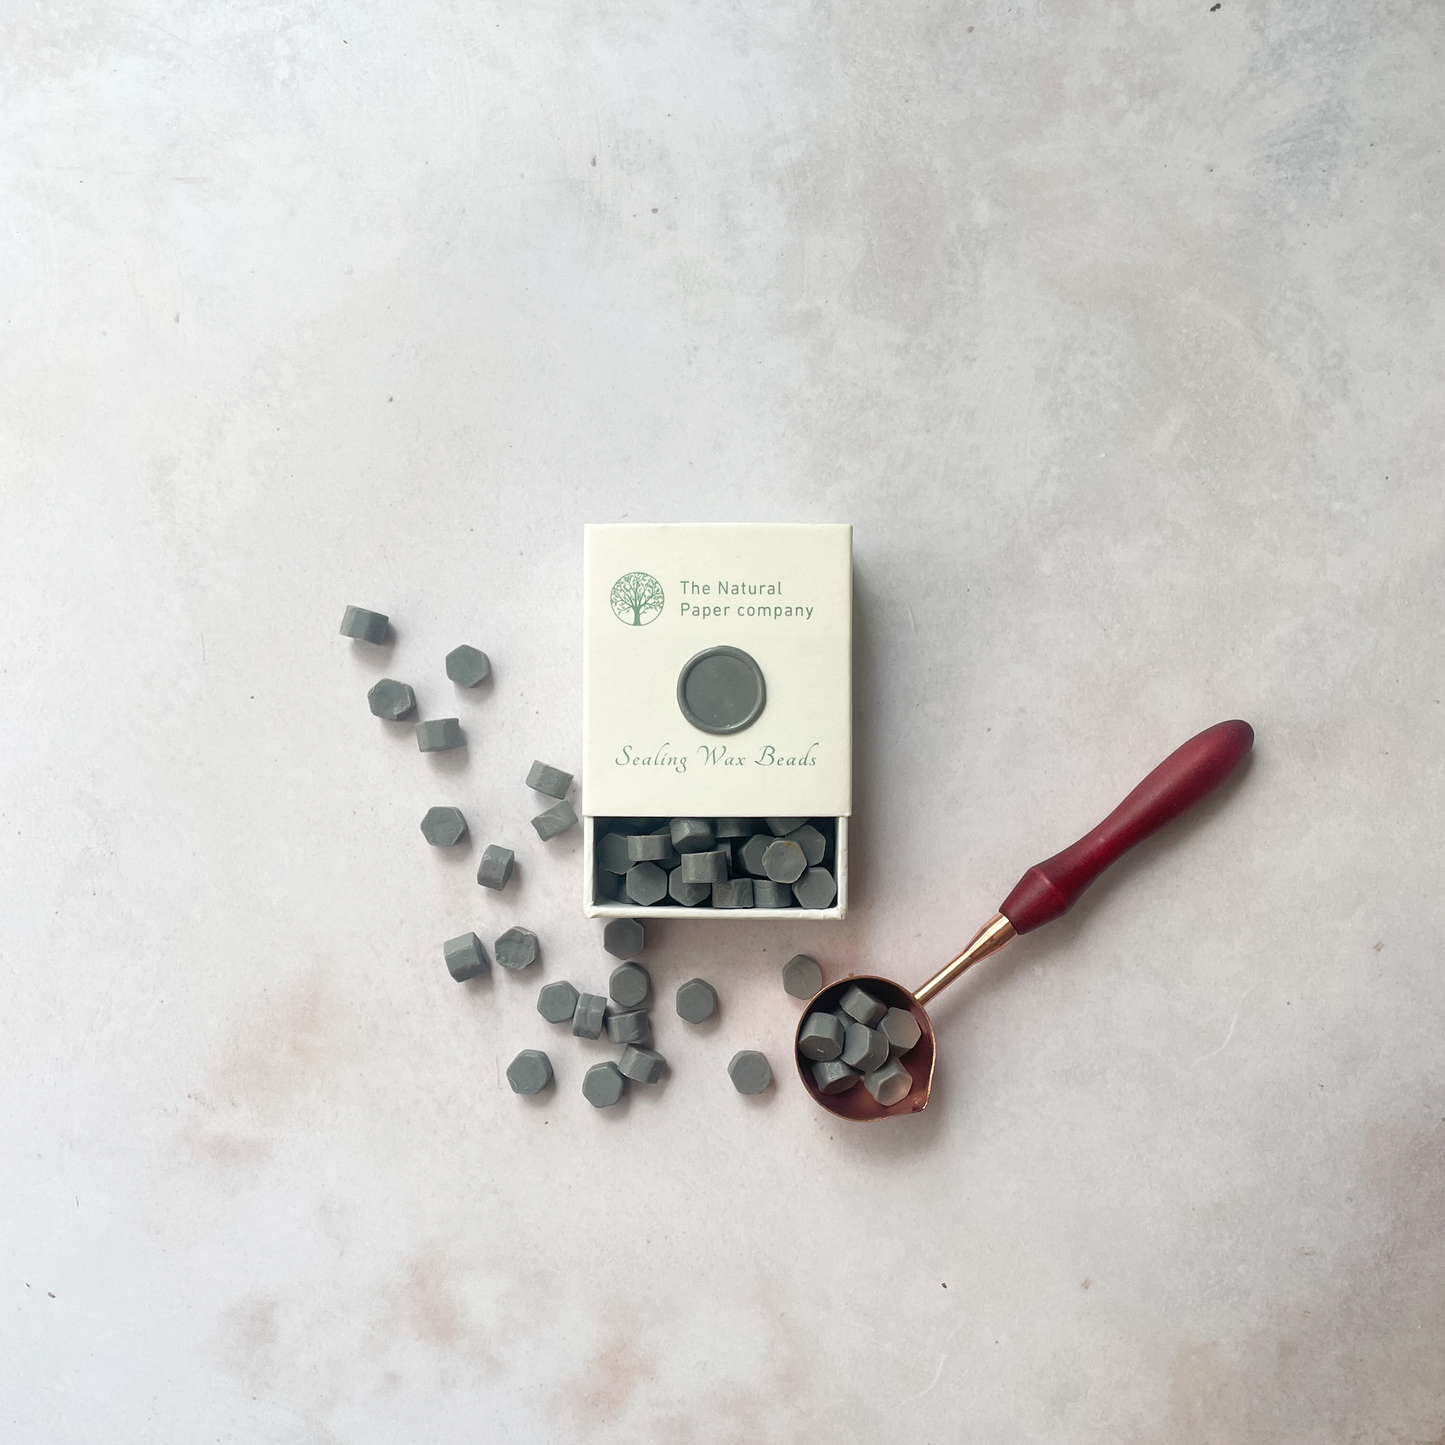 Eco friendly sealing wax beads in grey.  Box of wax to make wax seals.  Plastic free, paraffin free and biodegradable wax to make wax seals for wedding invitations, stationery, gift wrapping or packaging.  By The Natural paper Company